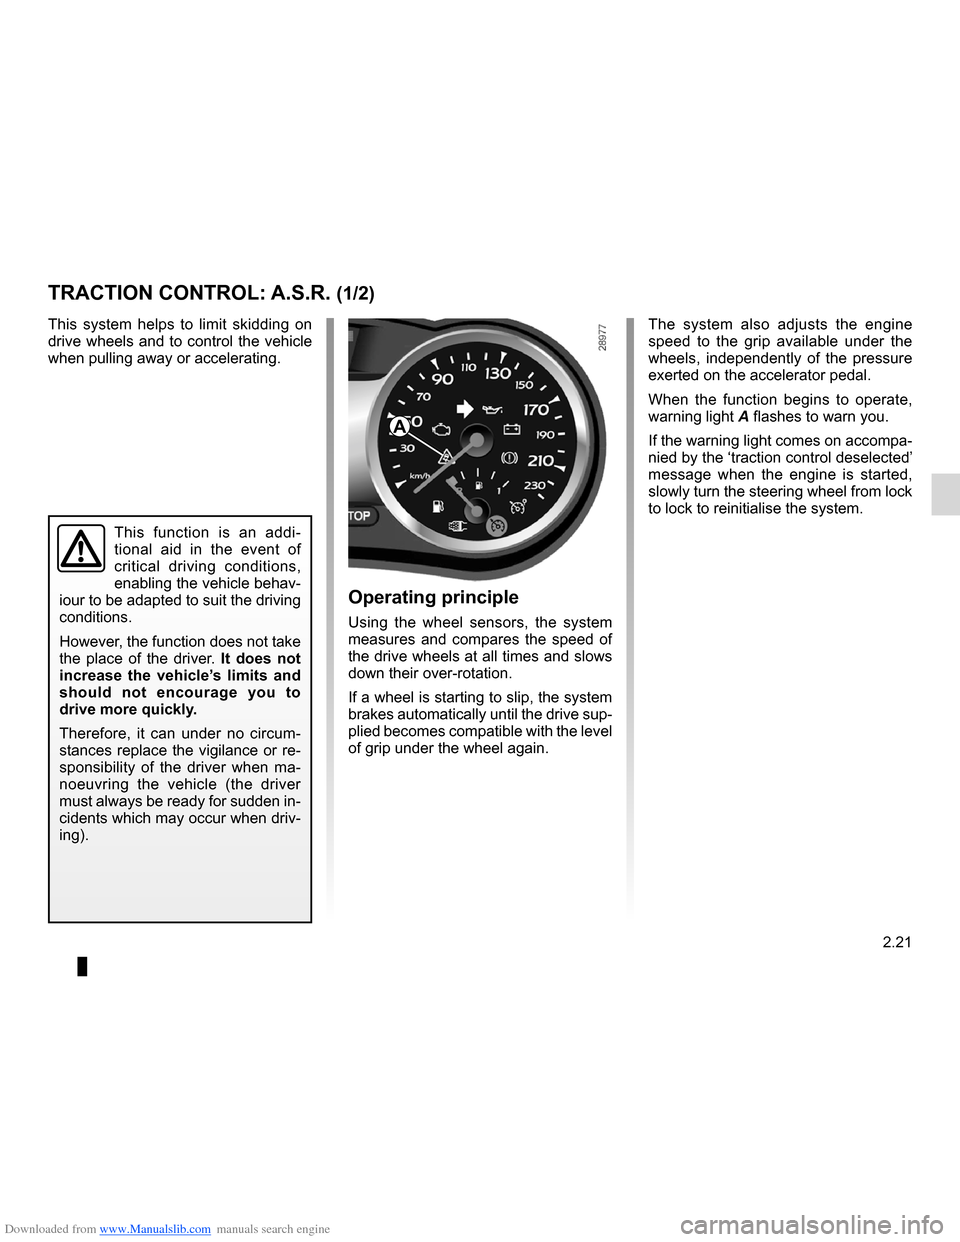 RENAULT CLIO 2012 X85 / 3.G User Guide Downloaded from www.Manualslib.com manuals search engine traction control: ASR .............................(up to the end of the DU)
driving  ................................................... (up t